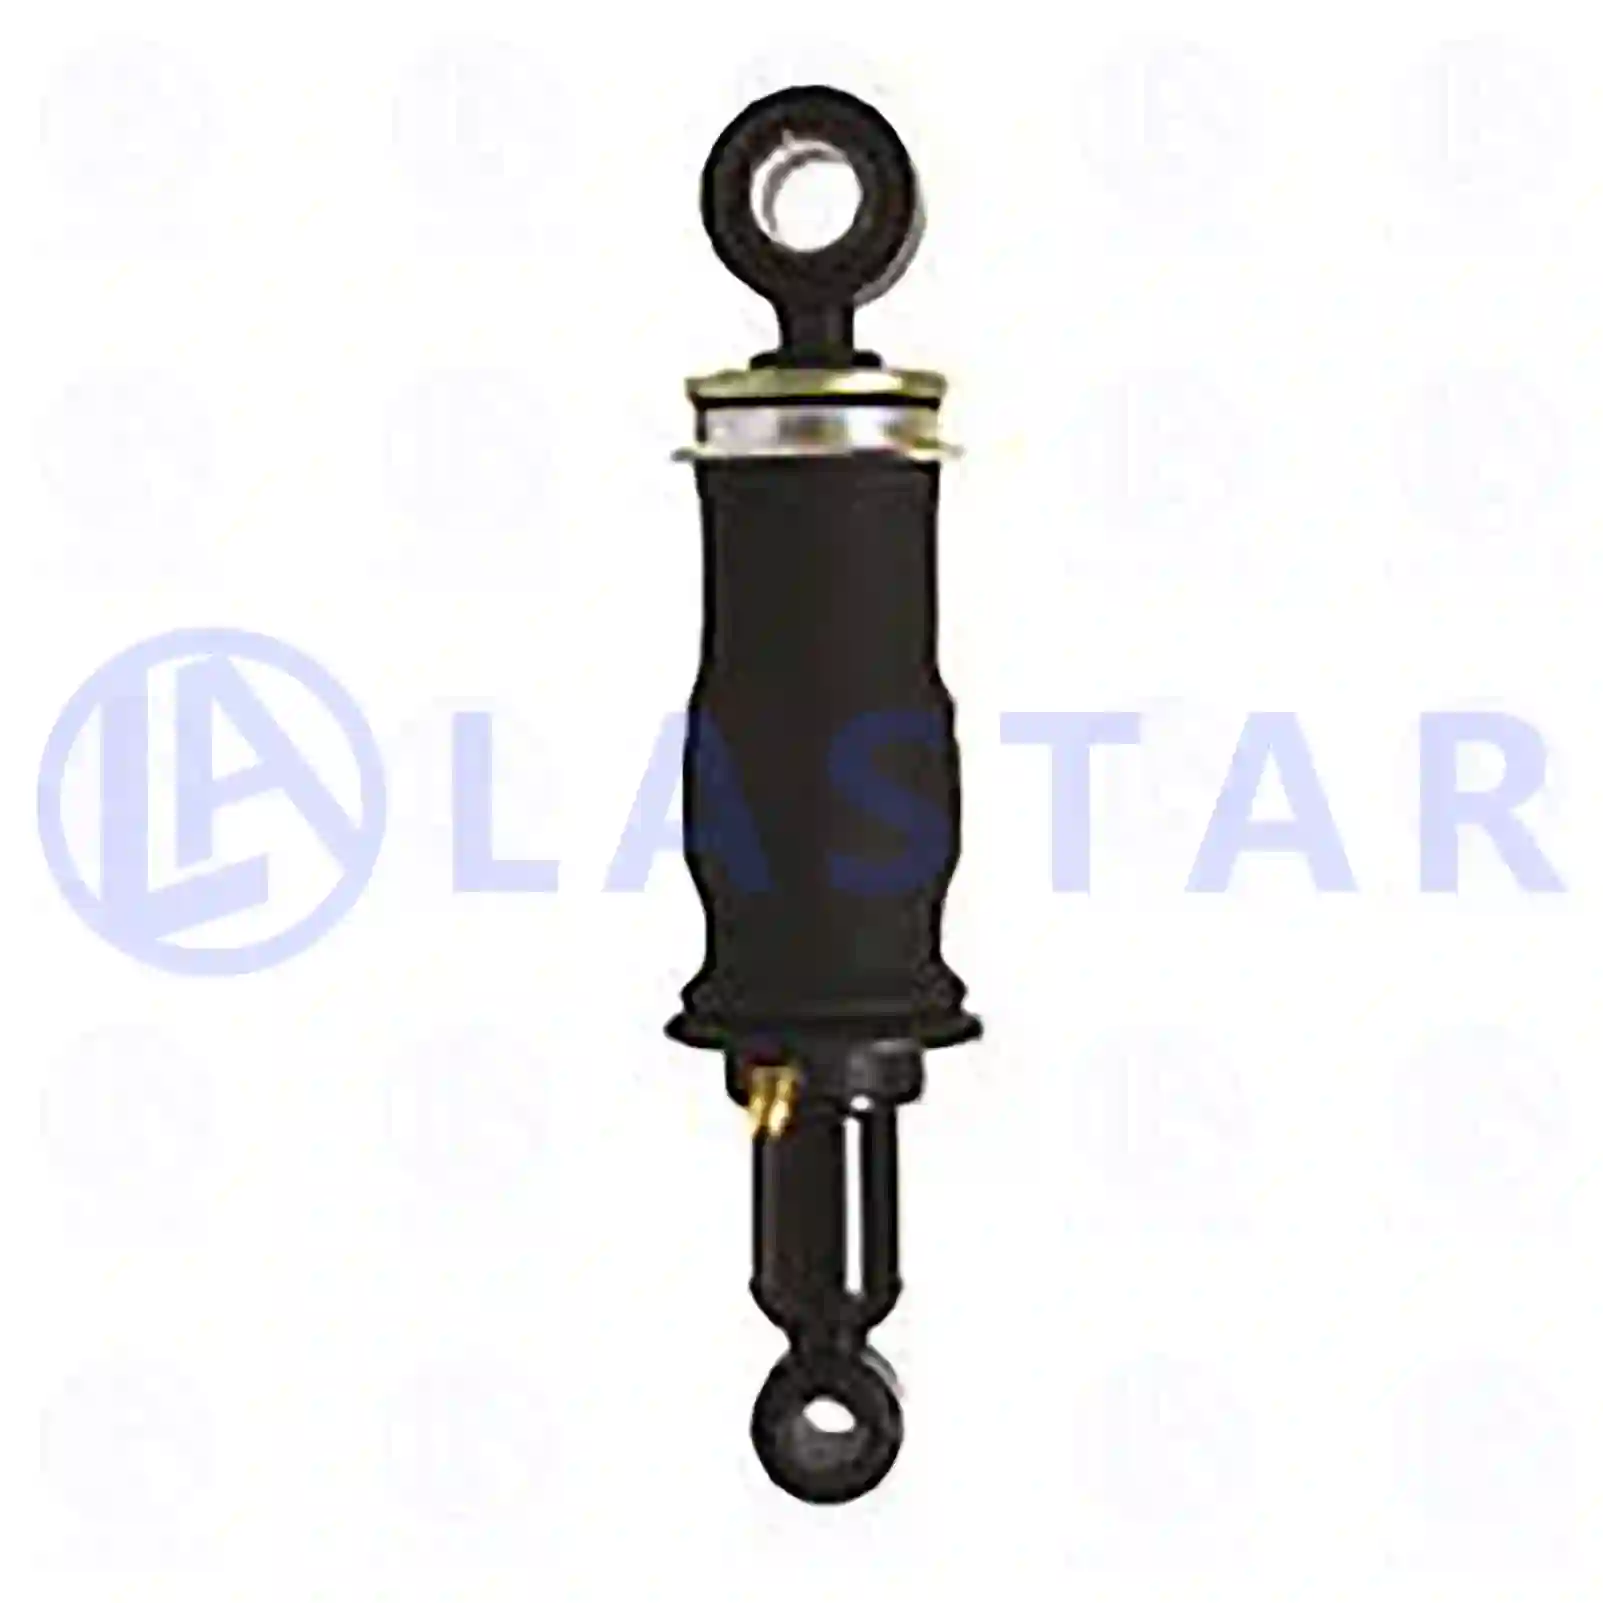 Cabin shock absorber, with air bellow, 77735601, 504080540, ZG41226-0008, , , ||  77735601 Lastar Spare Part | Truck Spare Parts, Auotomotive Spare Parts Cabin shock absorber, with air bellow, 77735601, 504080540, ZG41226-0008, , , ||  77735601 Lastar Spare Part | Truck Spare Parts, Auotomotive Spare Parts